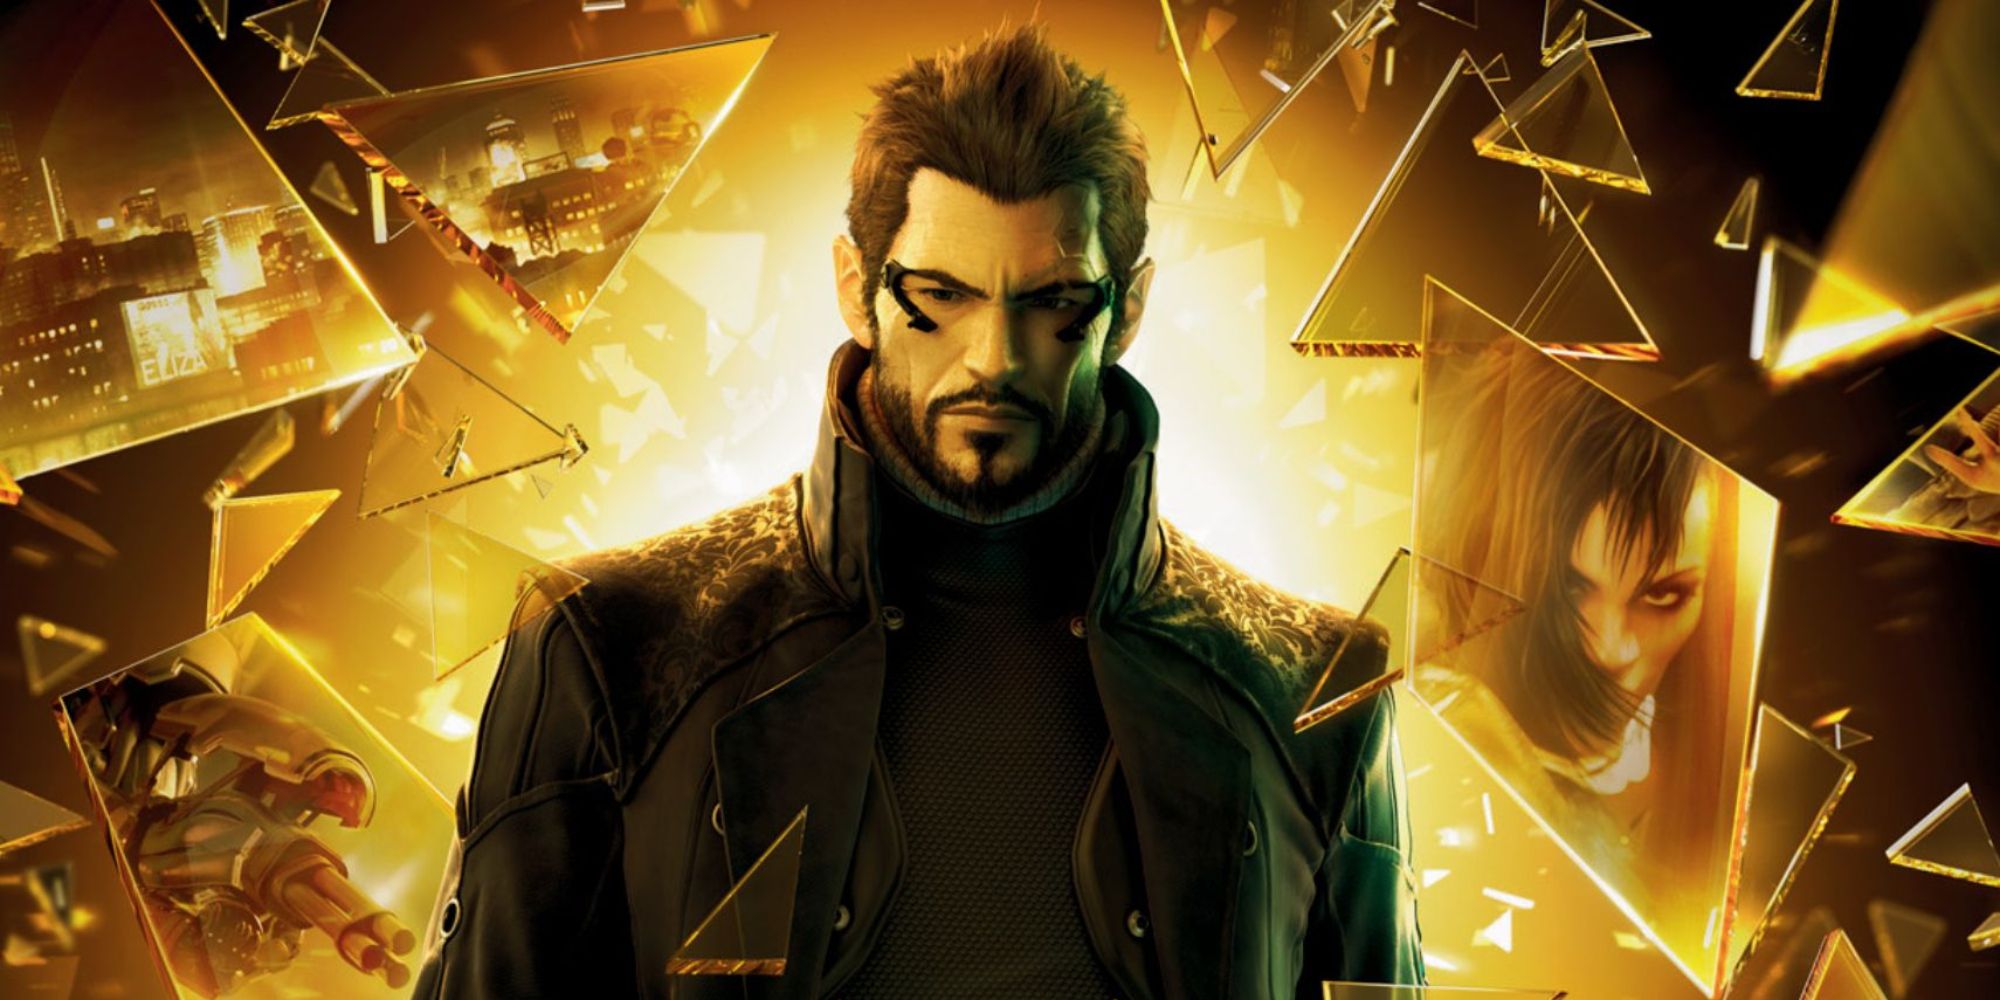 Best RPG Soundtracks a shot of Adam Jensen from Deus Ex: Human Revolution stood against a yellow background with fractured glass reflecting locations and characters from the game surrounding him